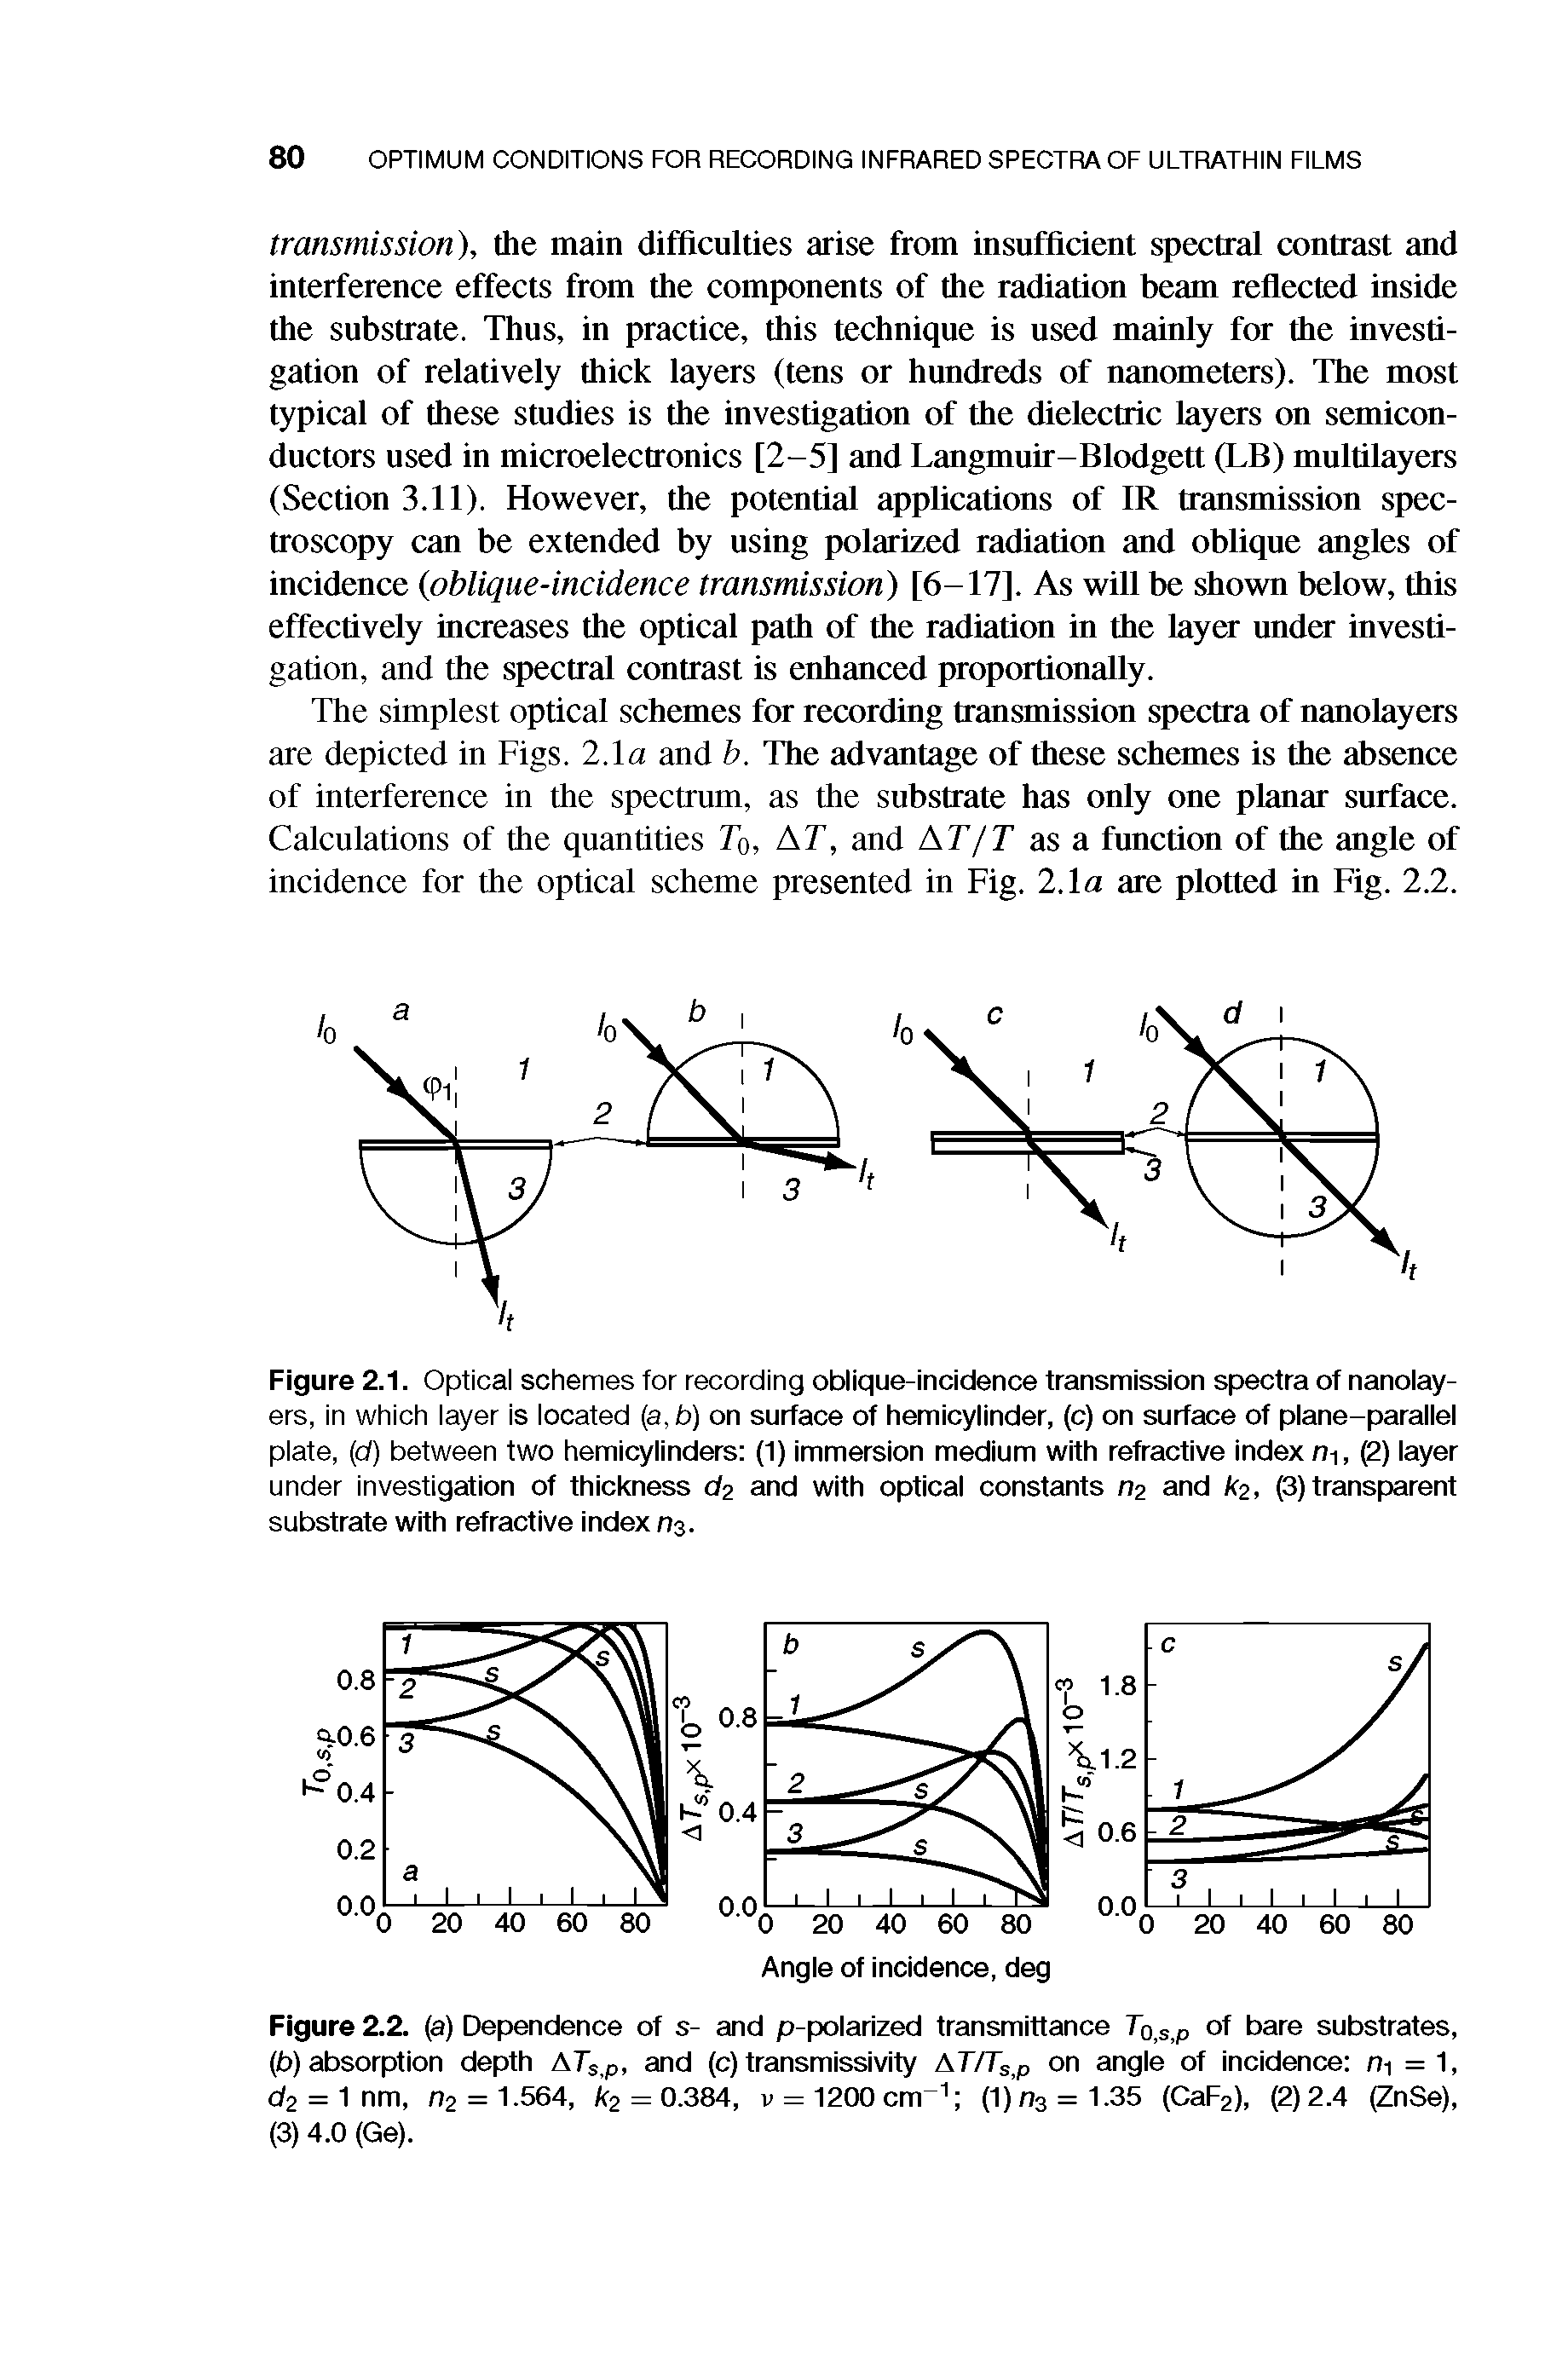 Figure 2.1. Optical schemes for recording oblique-incidence transmission spectra of nanolayers, in which layer is located (a, b) on surface of hemicylinder, (c) on surface of plane-parallel plate, (d) between two hemicylinders (1) immersion medium with refractive index ni, (2) layer under investigation of thickness d2 and with optical constants 02 and kz, (3) transparent substrate with refractive index n%.